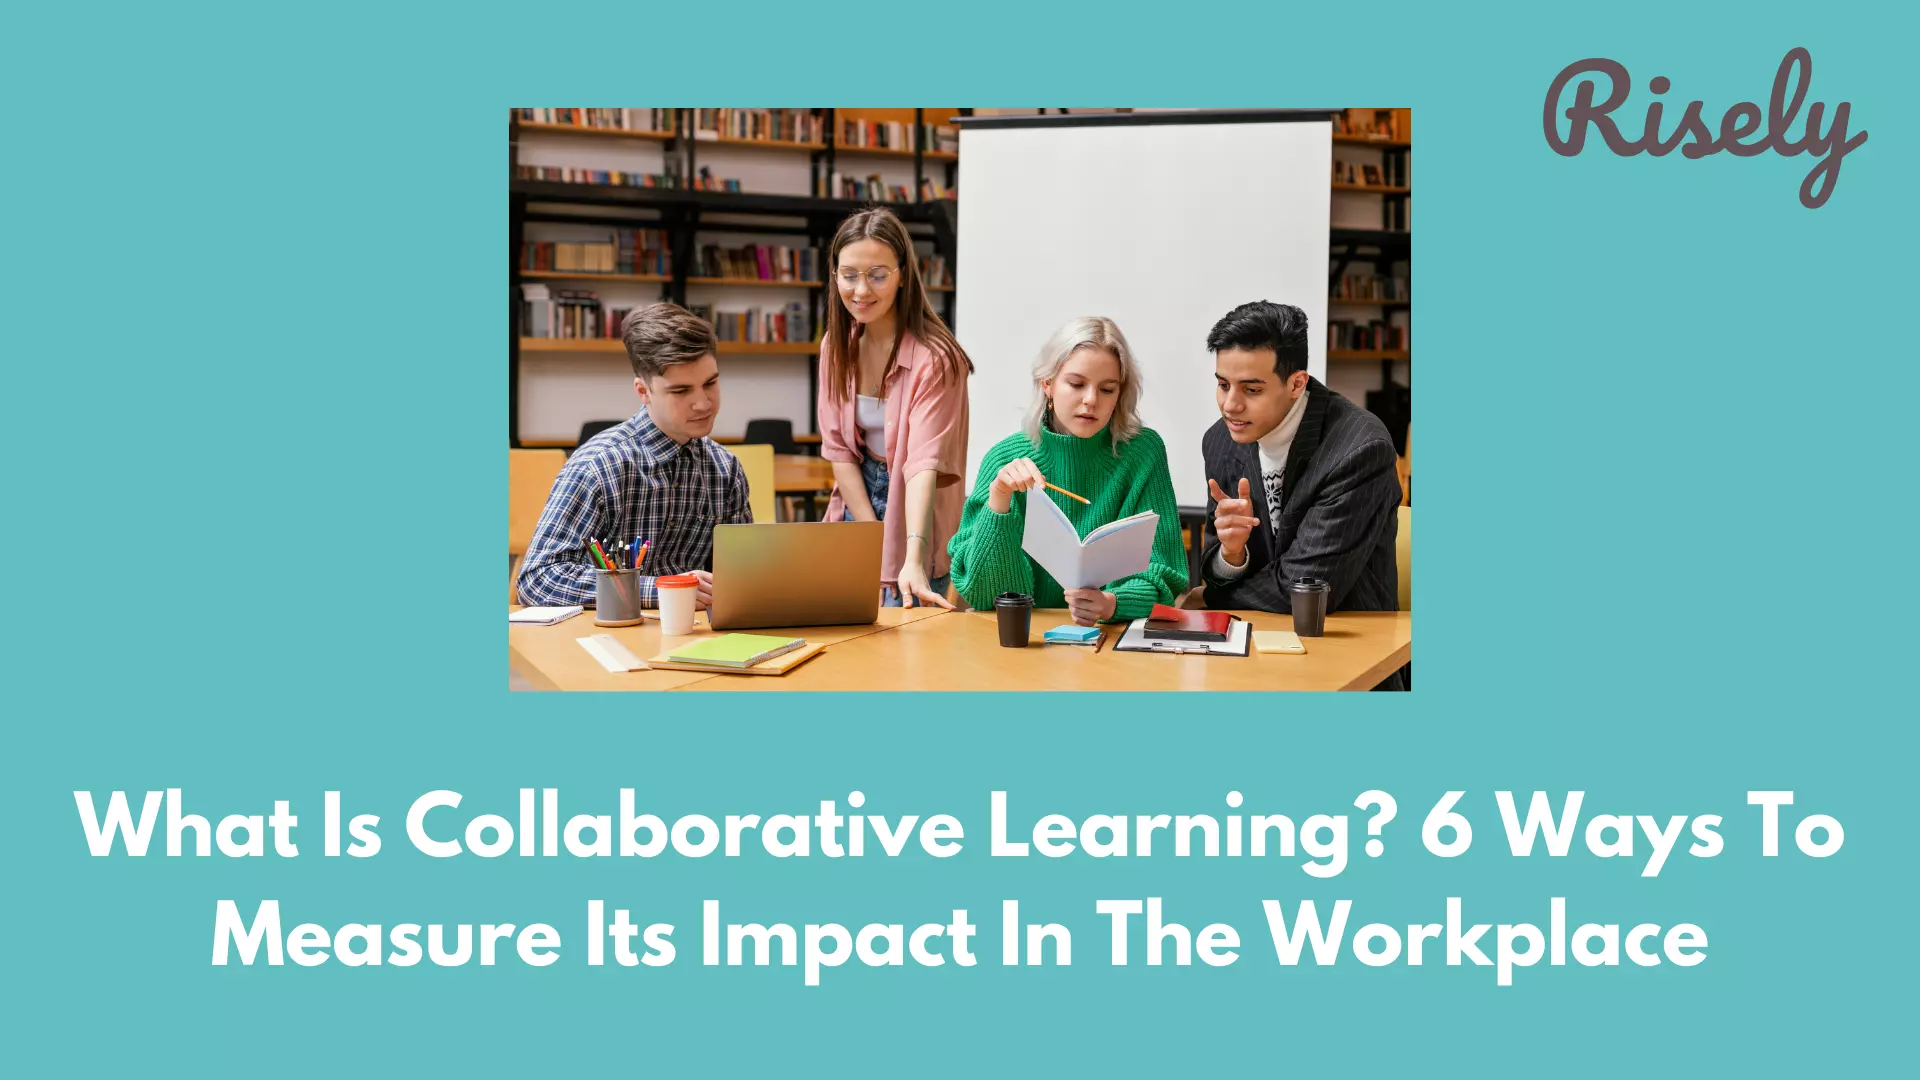 What Is Collaborative Learning? 6 Ways To Measure Its Impact In The Workplace